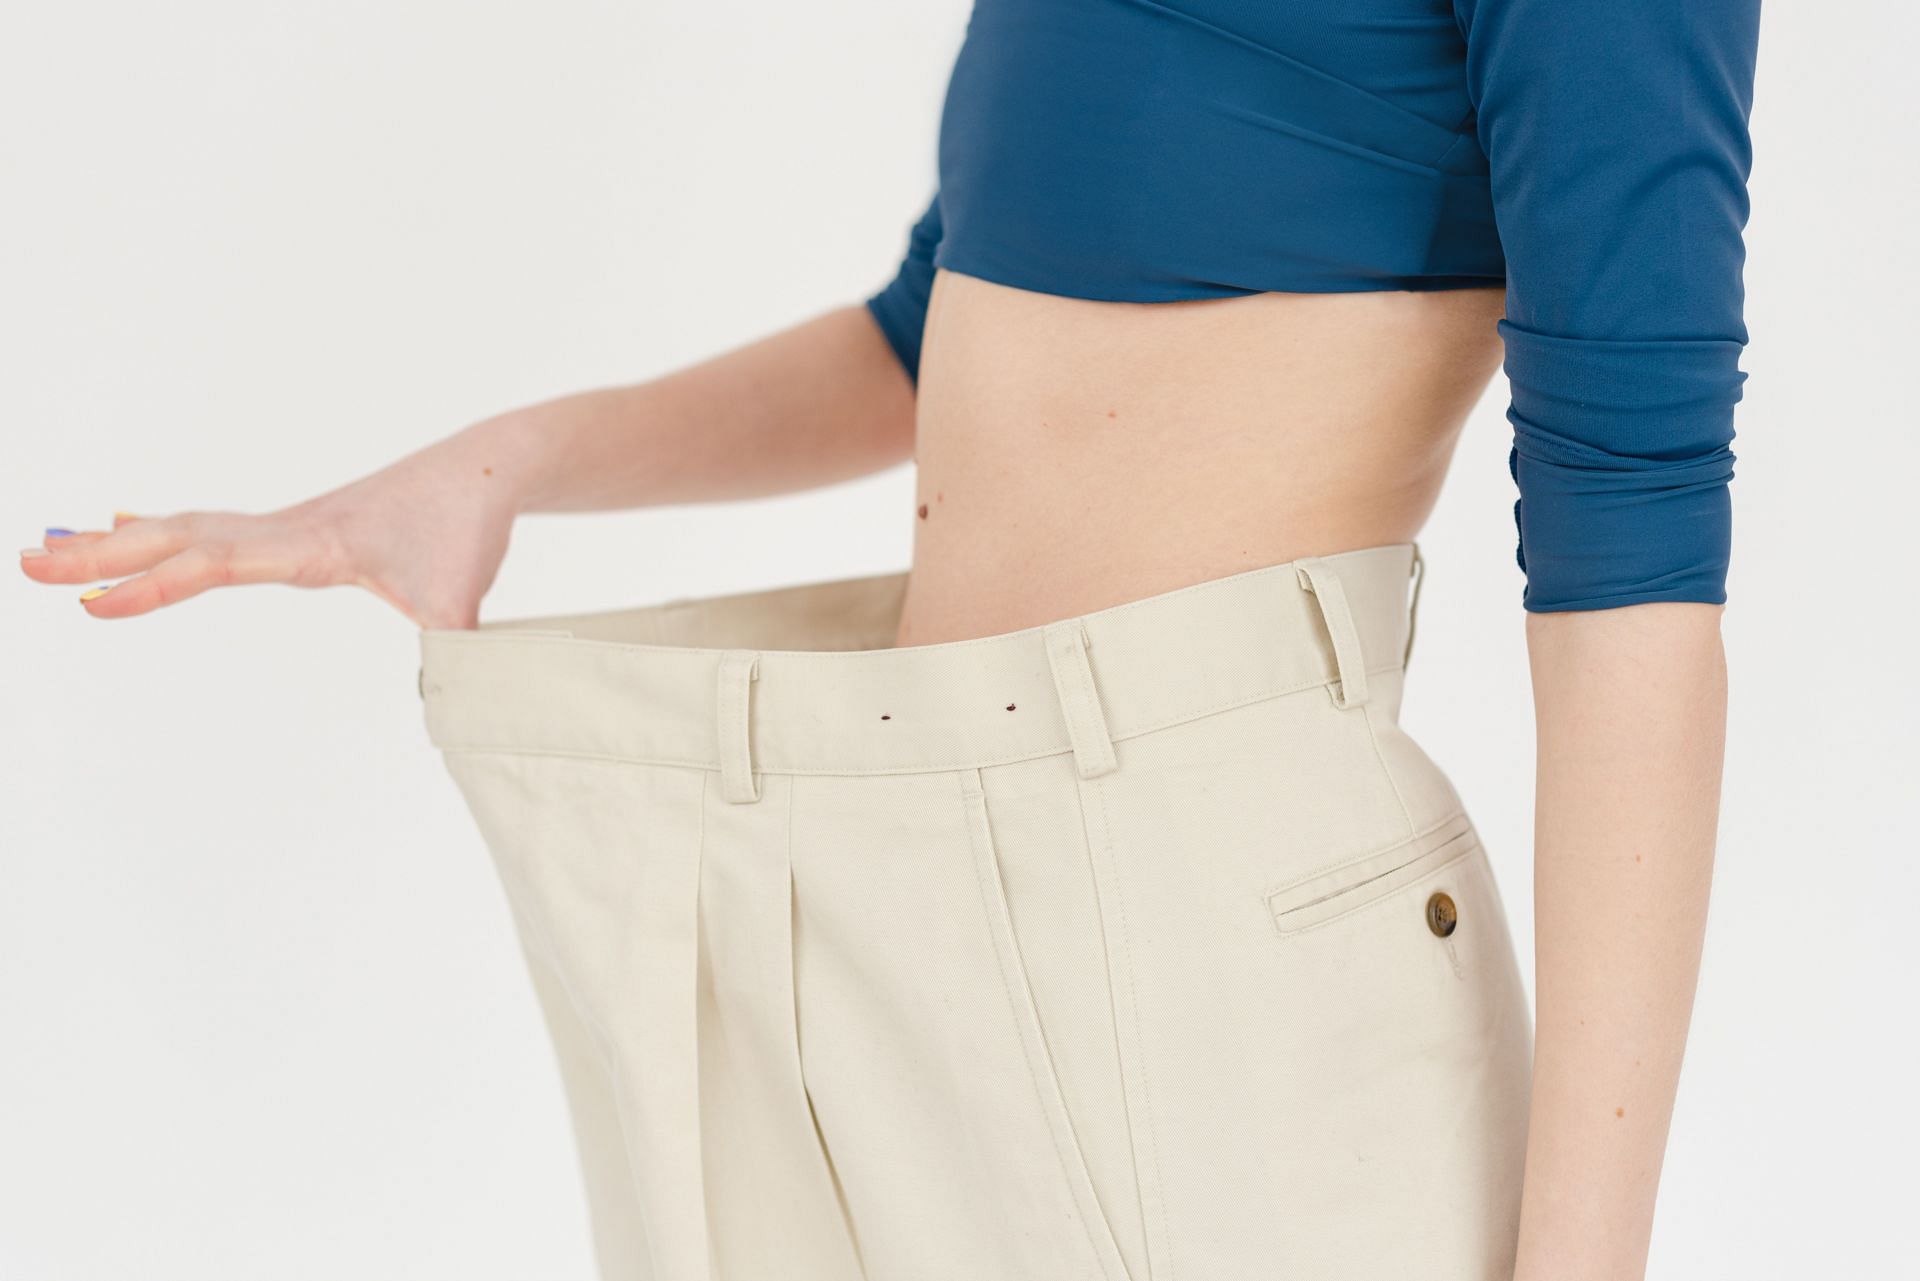 Belly fat can have negative implications on health. (Image via Pexels/Shvets Production)